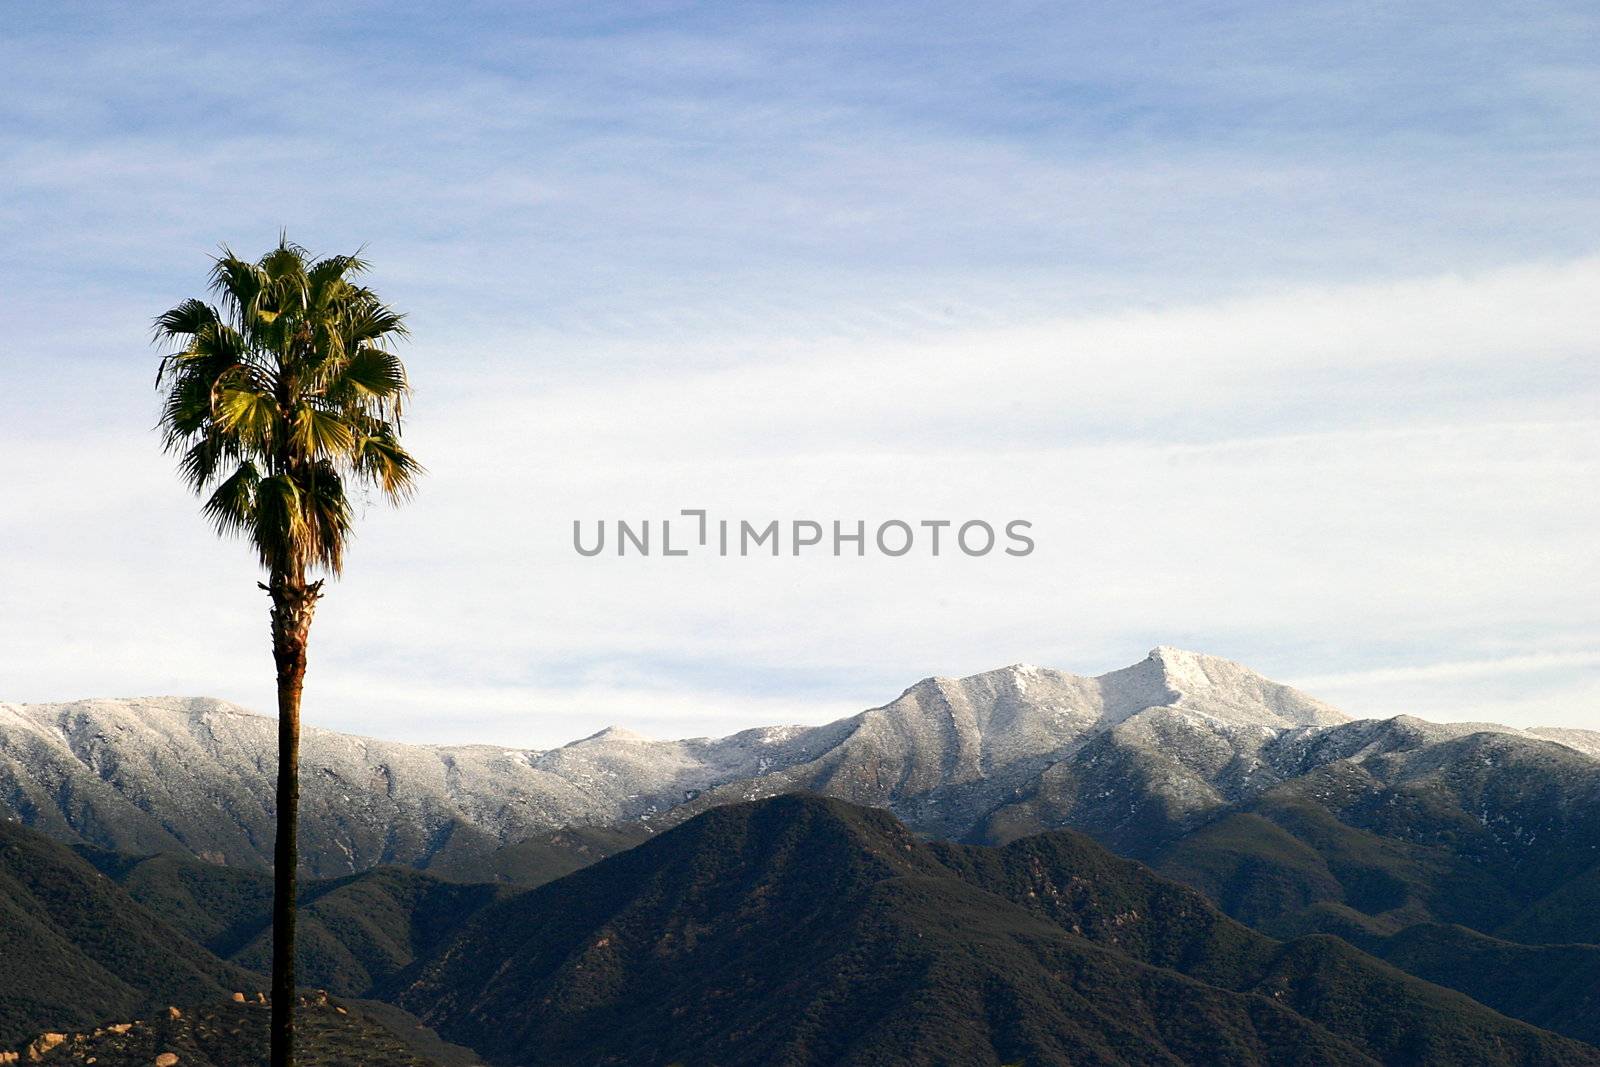 Southern California Snow (4315) by hlehnerer